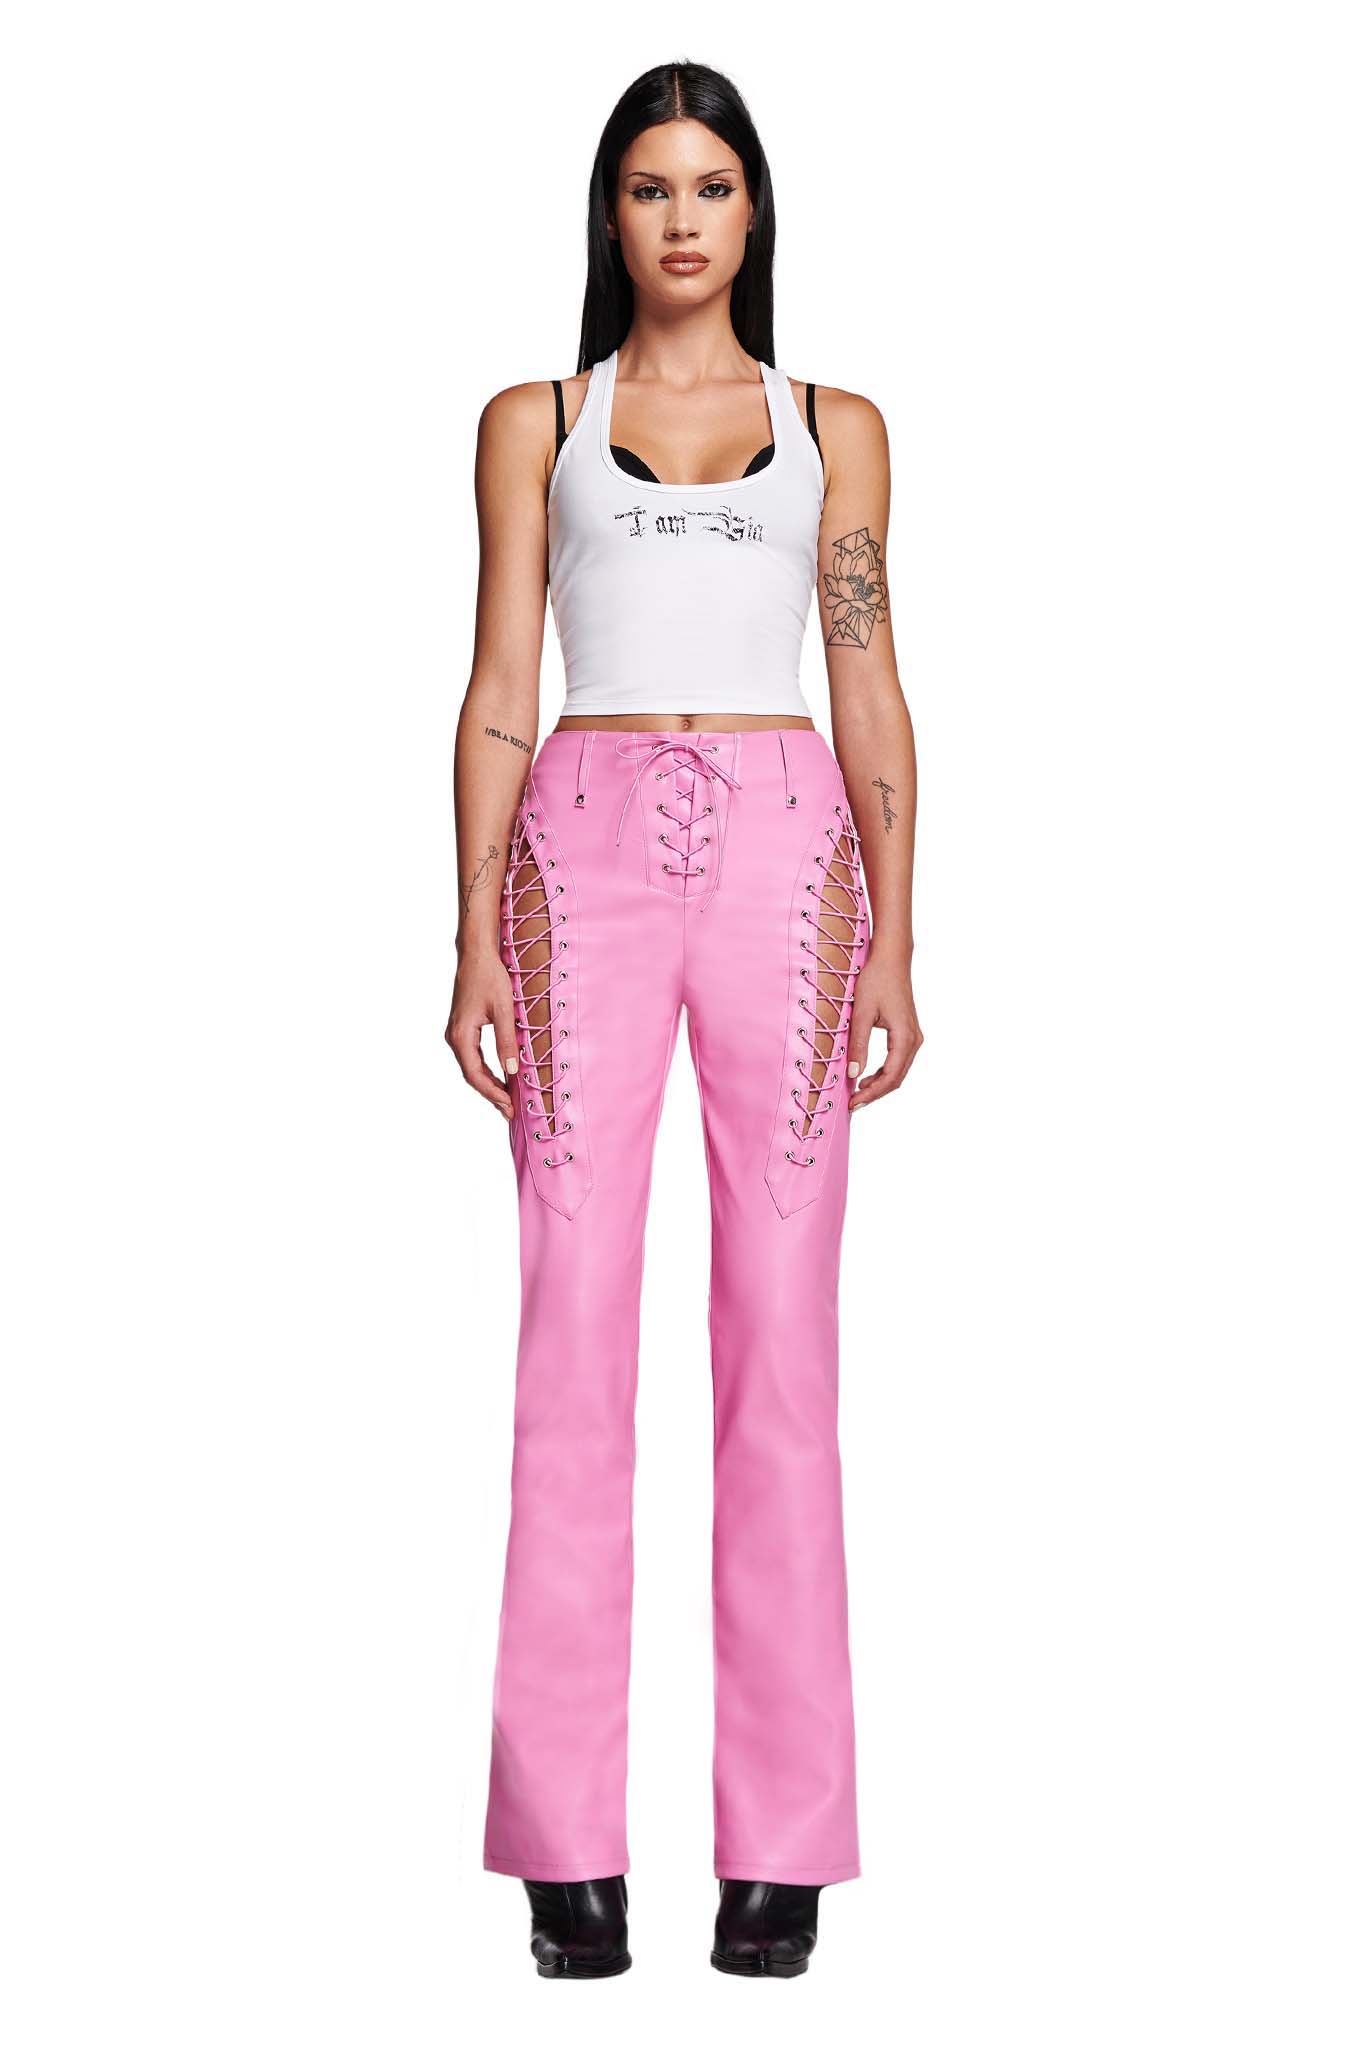 ANJAMANOR Colorblock PU Leather Mens And Womens Streetwear Pink Leather  Pants Sexy Cut Out Low Rise Straight Style For Rave And Club Wear D56EH37  230324 From Buyocean01, $21.79 | DHgate.Com